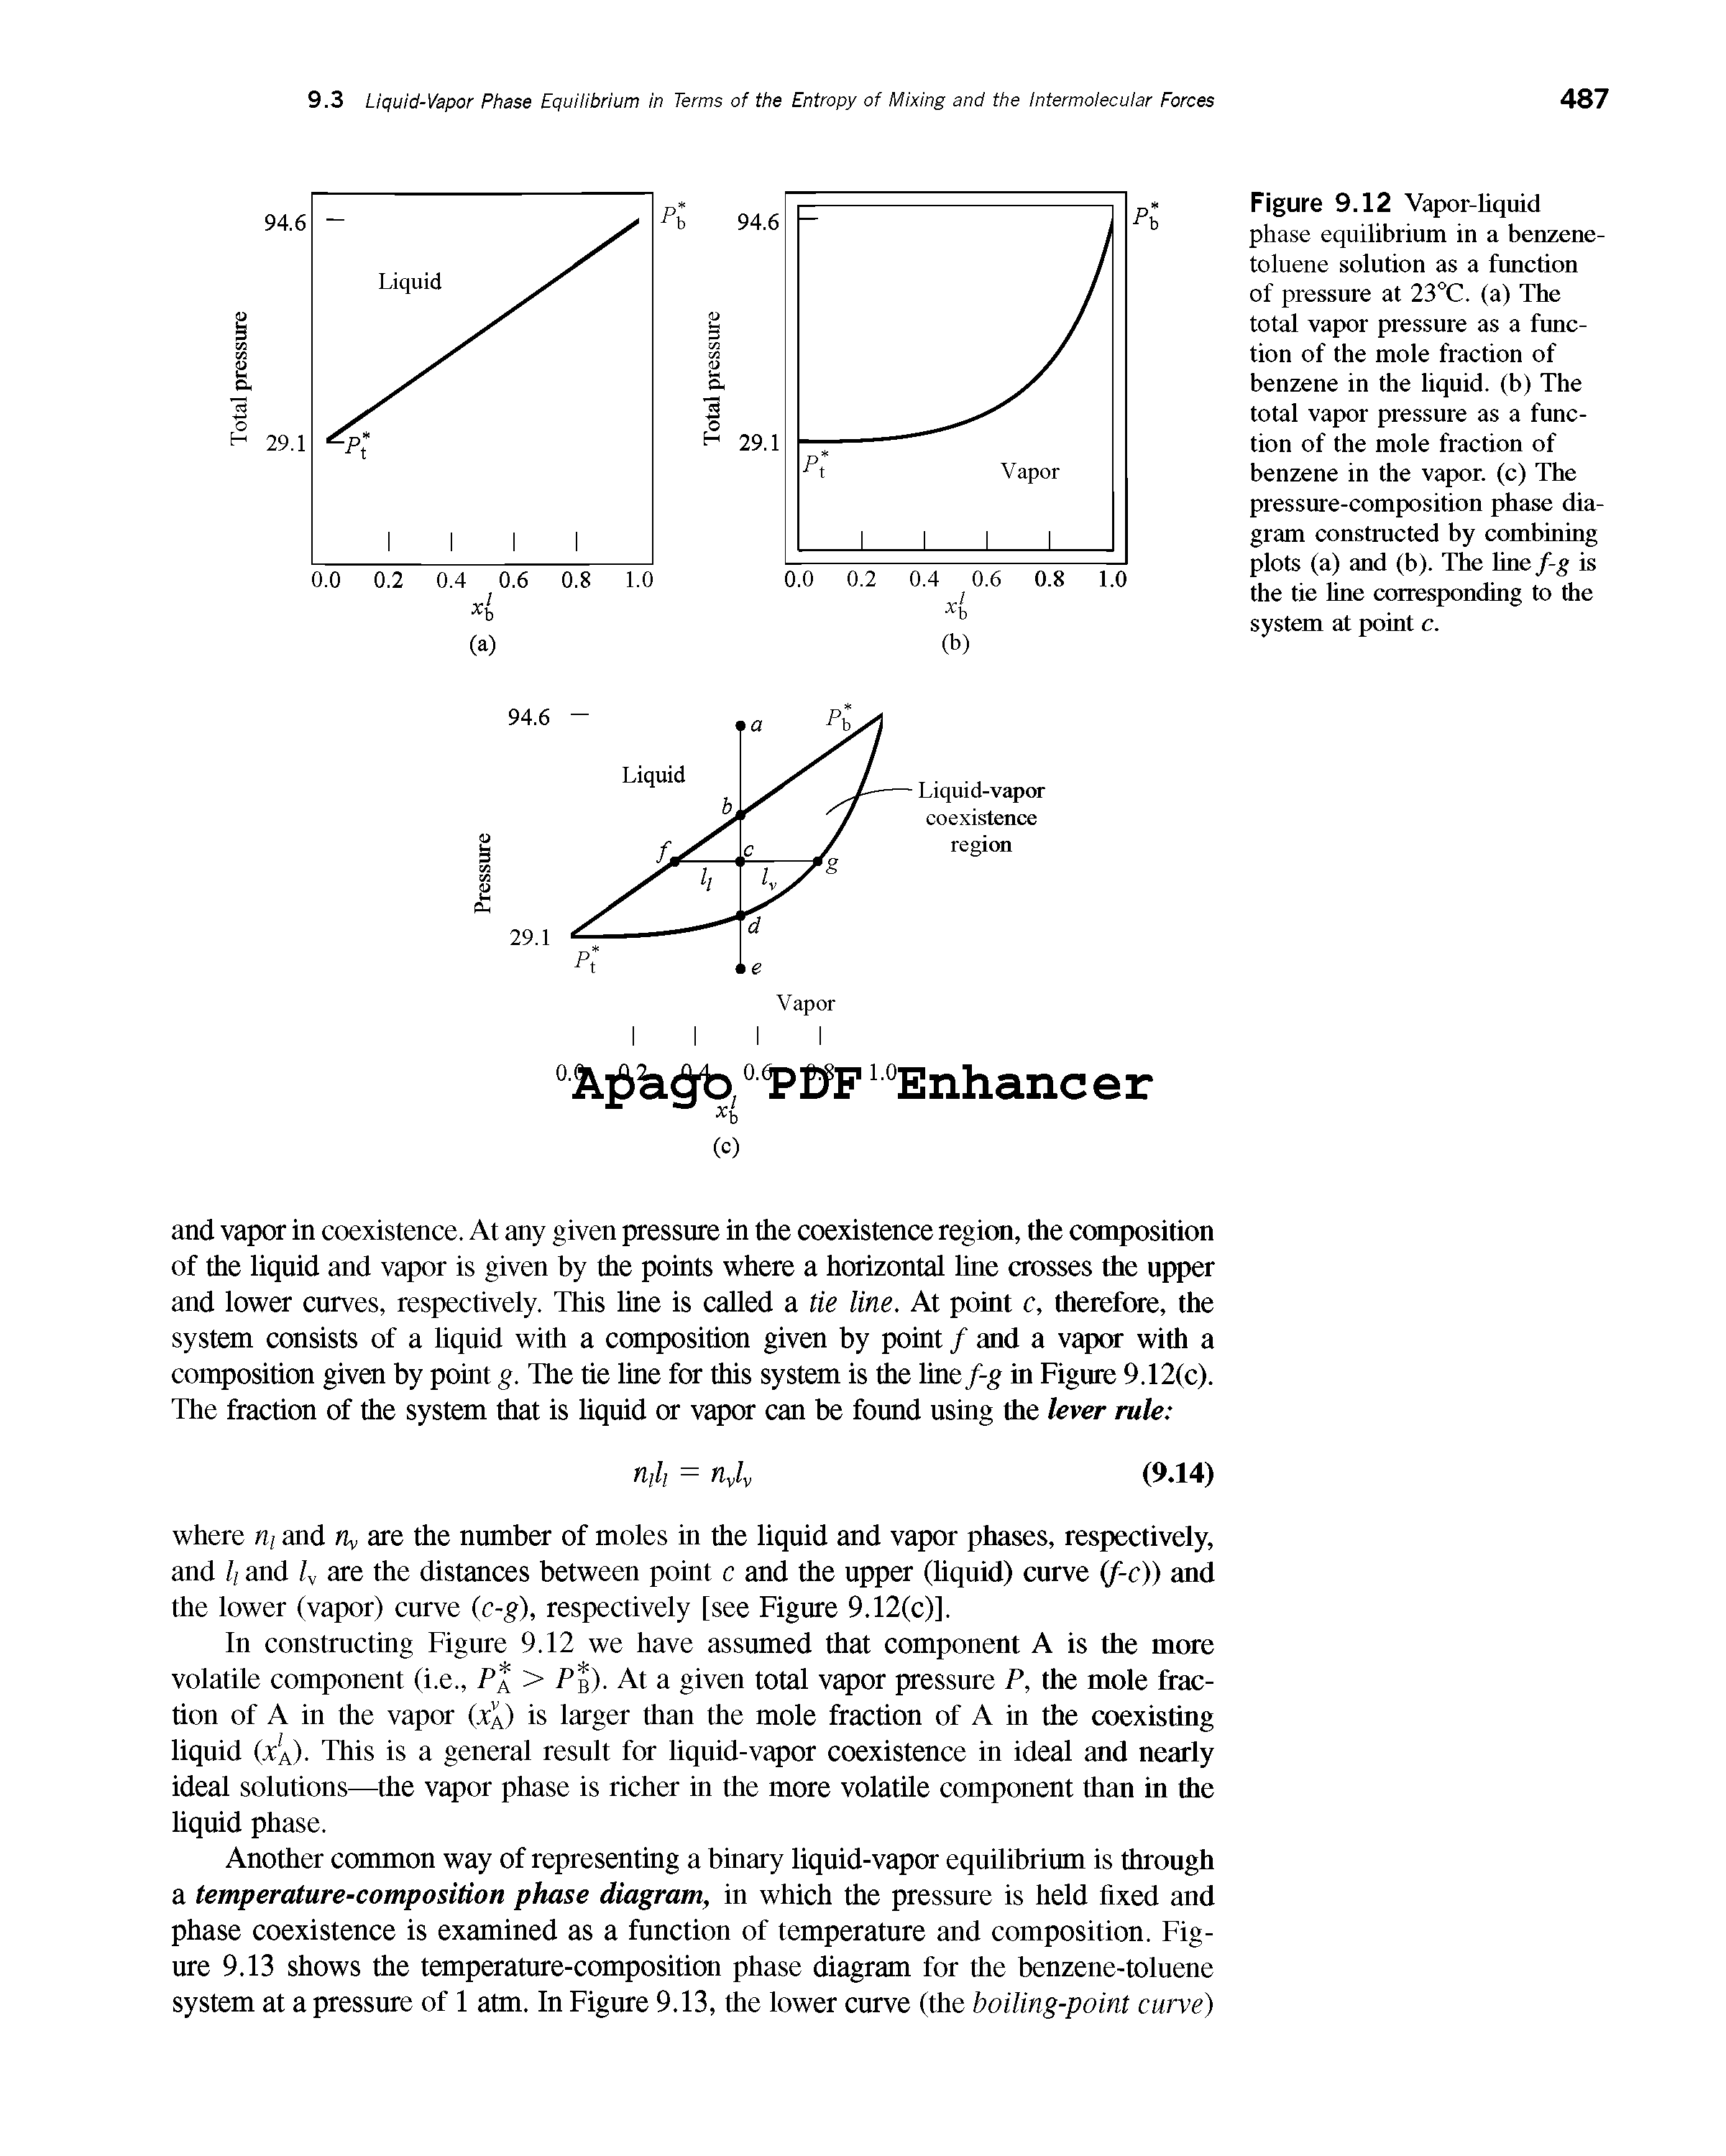 Figure 9.12 Vapor-liquid phase equilibrium in a benzene-toluene solution as a function of pressure at 23°C. (a) The total vapor pressure as a function of the mole fraction of benzene in the liquid, (b) The total vapor pressure as a function of the mole fraction of benzene in the vapor, (c) The pressure-composition phase diagram constructed by combining plots (a) and (b). The line/-g is the tie line corresponding to the system at point c.